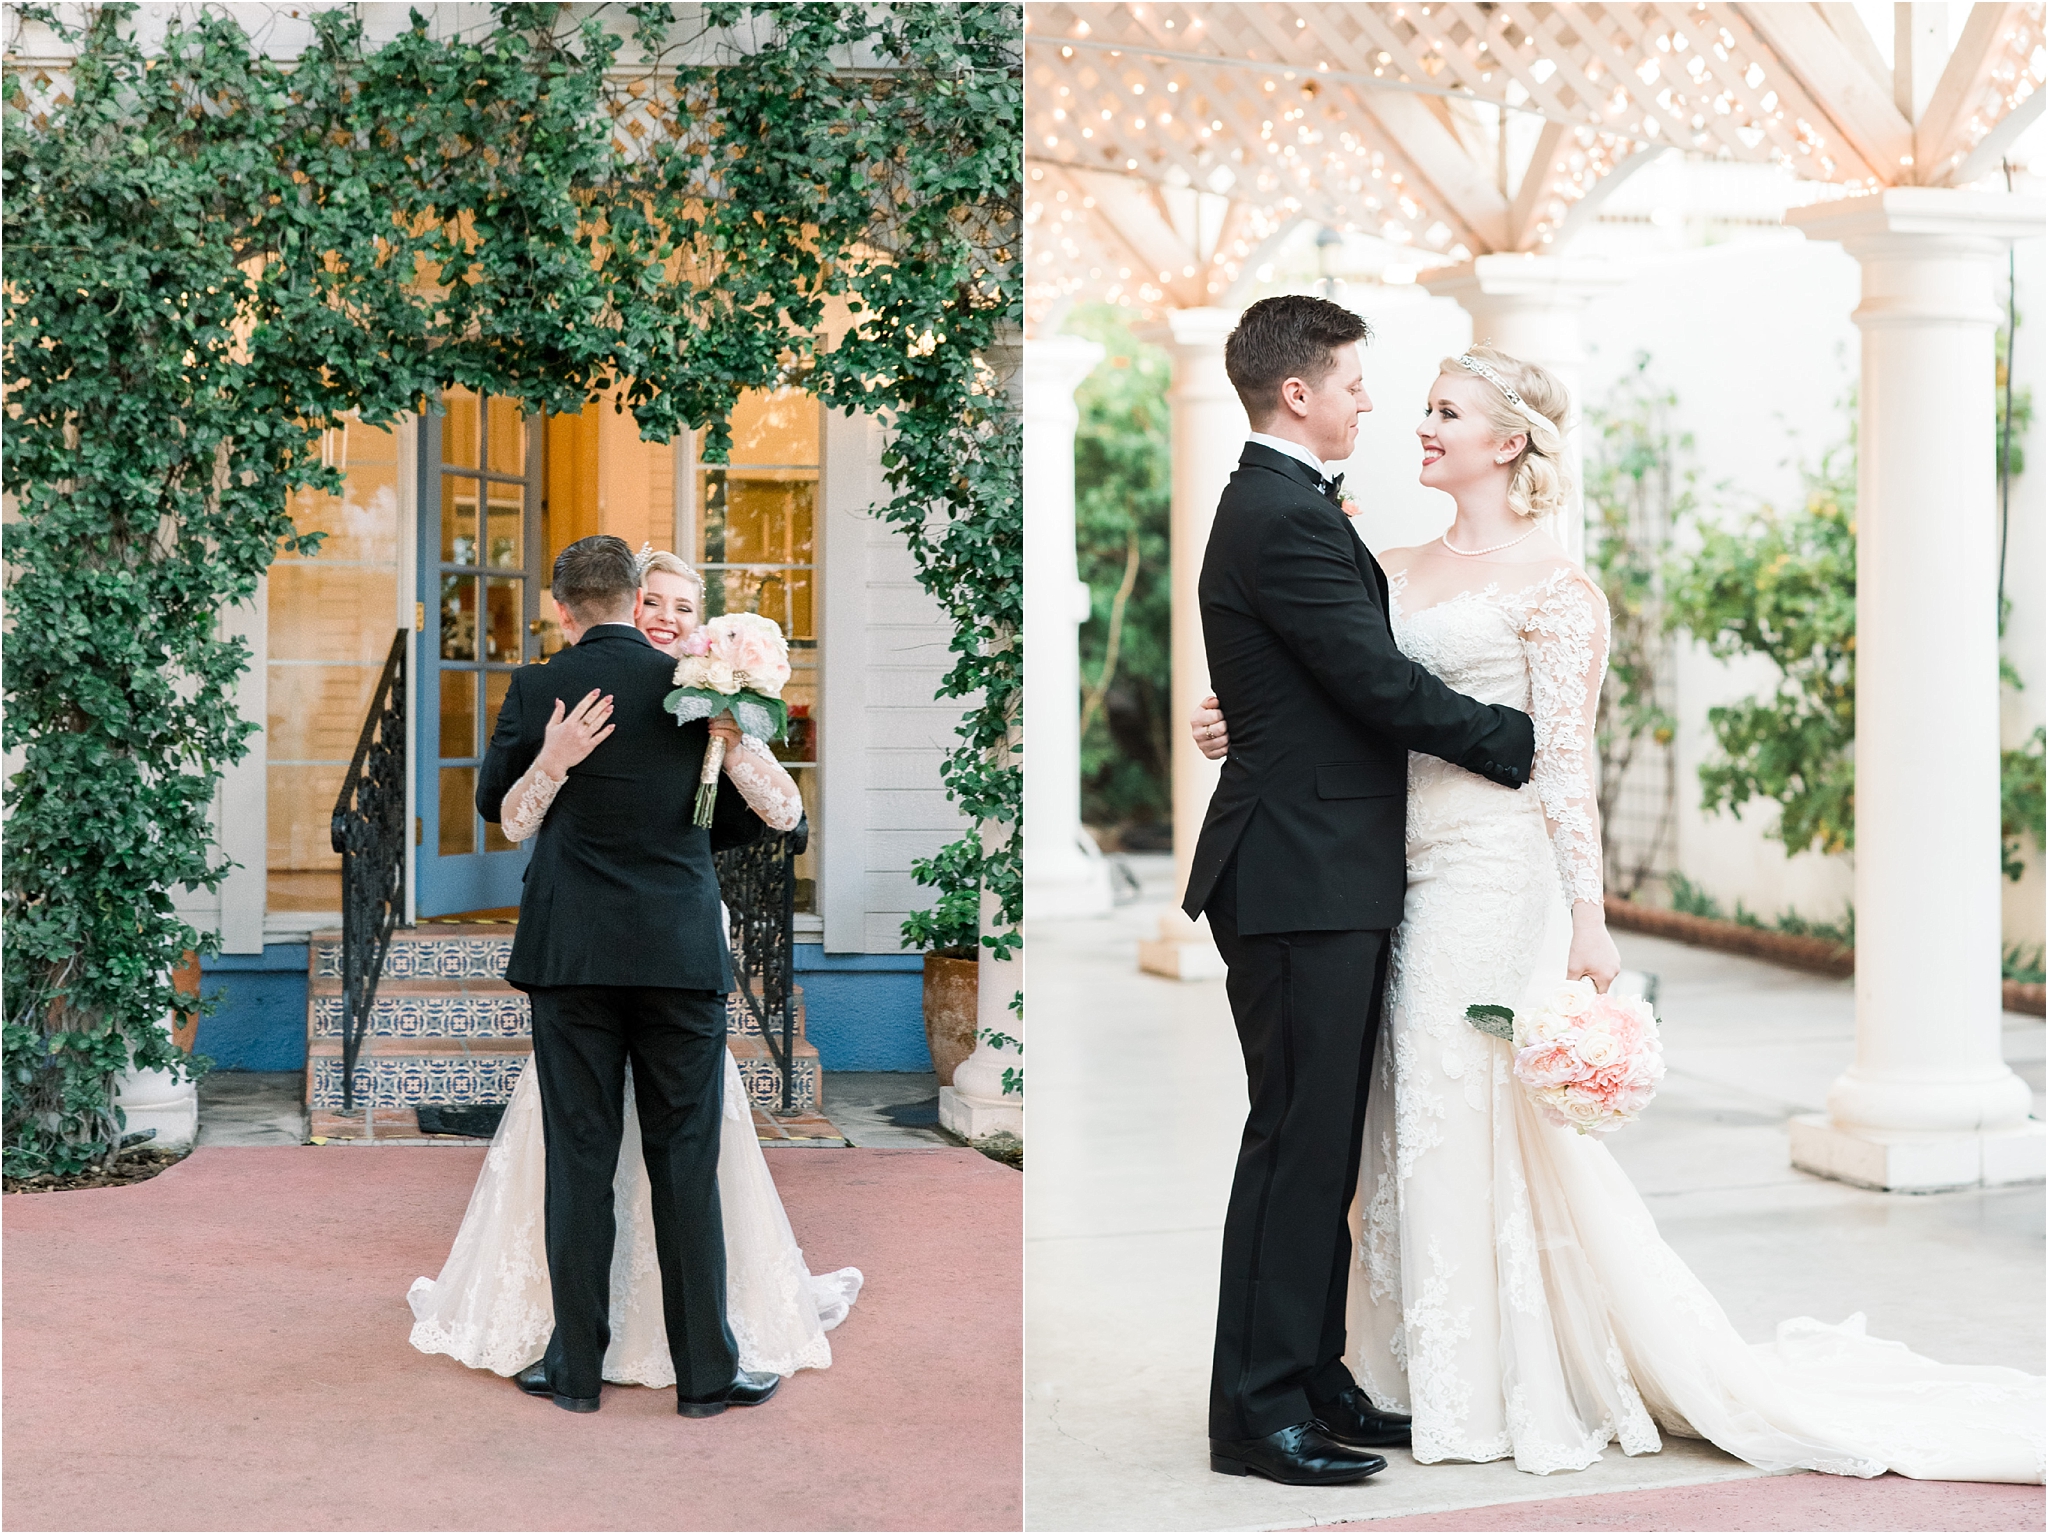 A darling First Look at a Z Mansion Wedding in Tucson, AZ | Tucson Wedding Photographer | Bryan & Anh of West End Photography